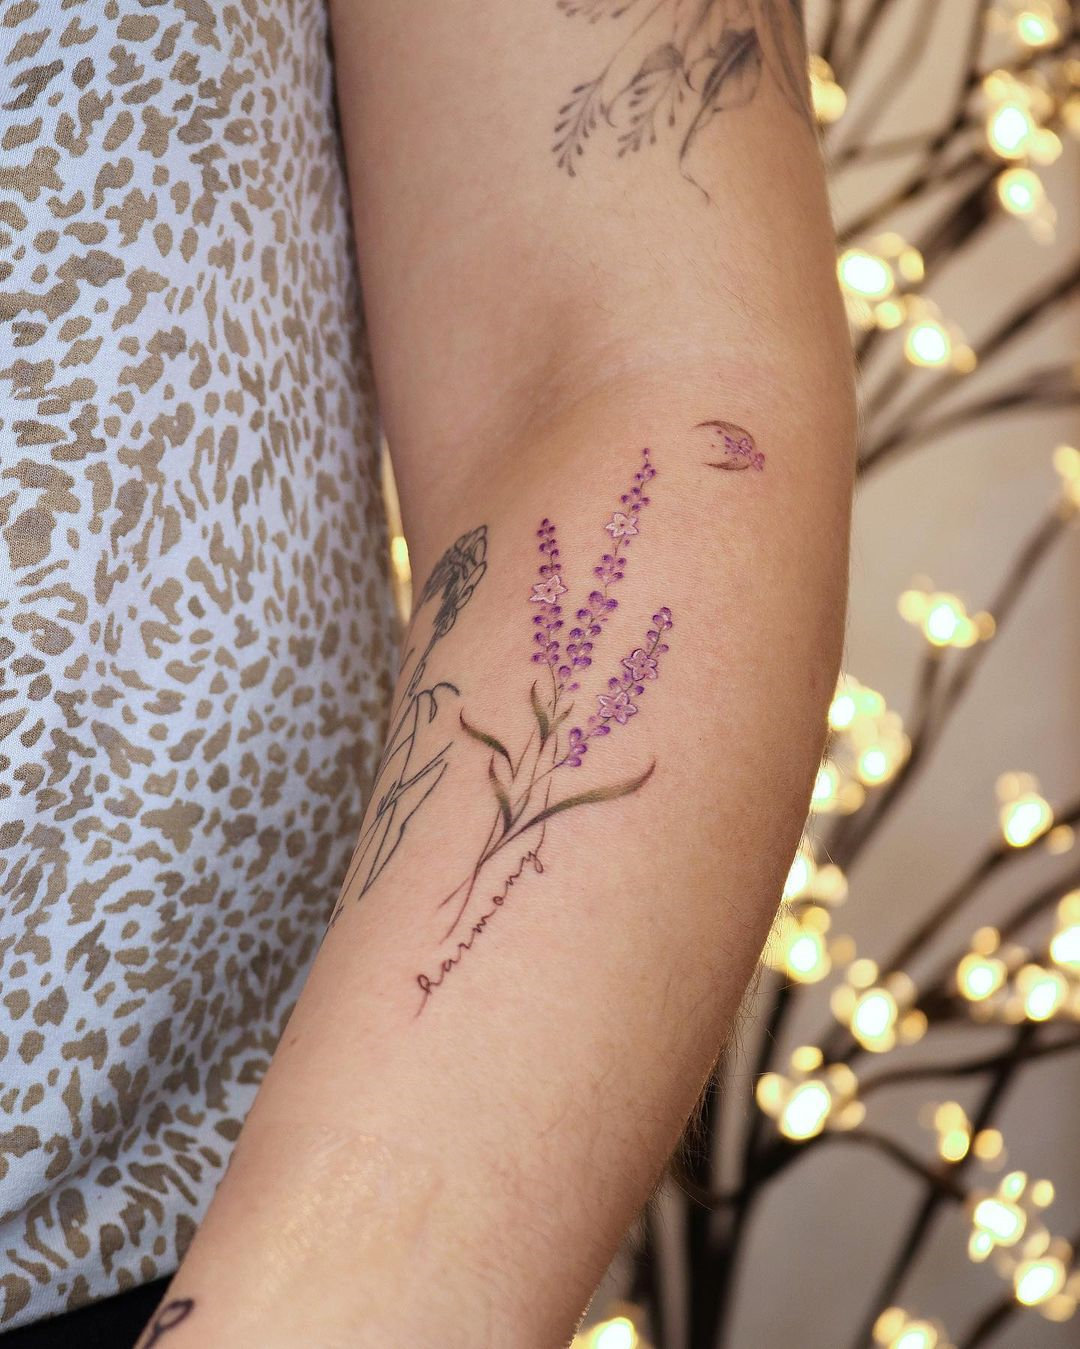 35 Small Tattoo ideas with Meaning for Women